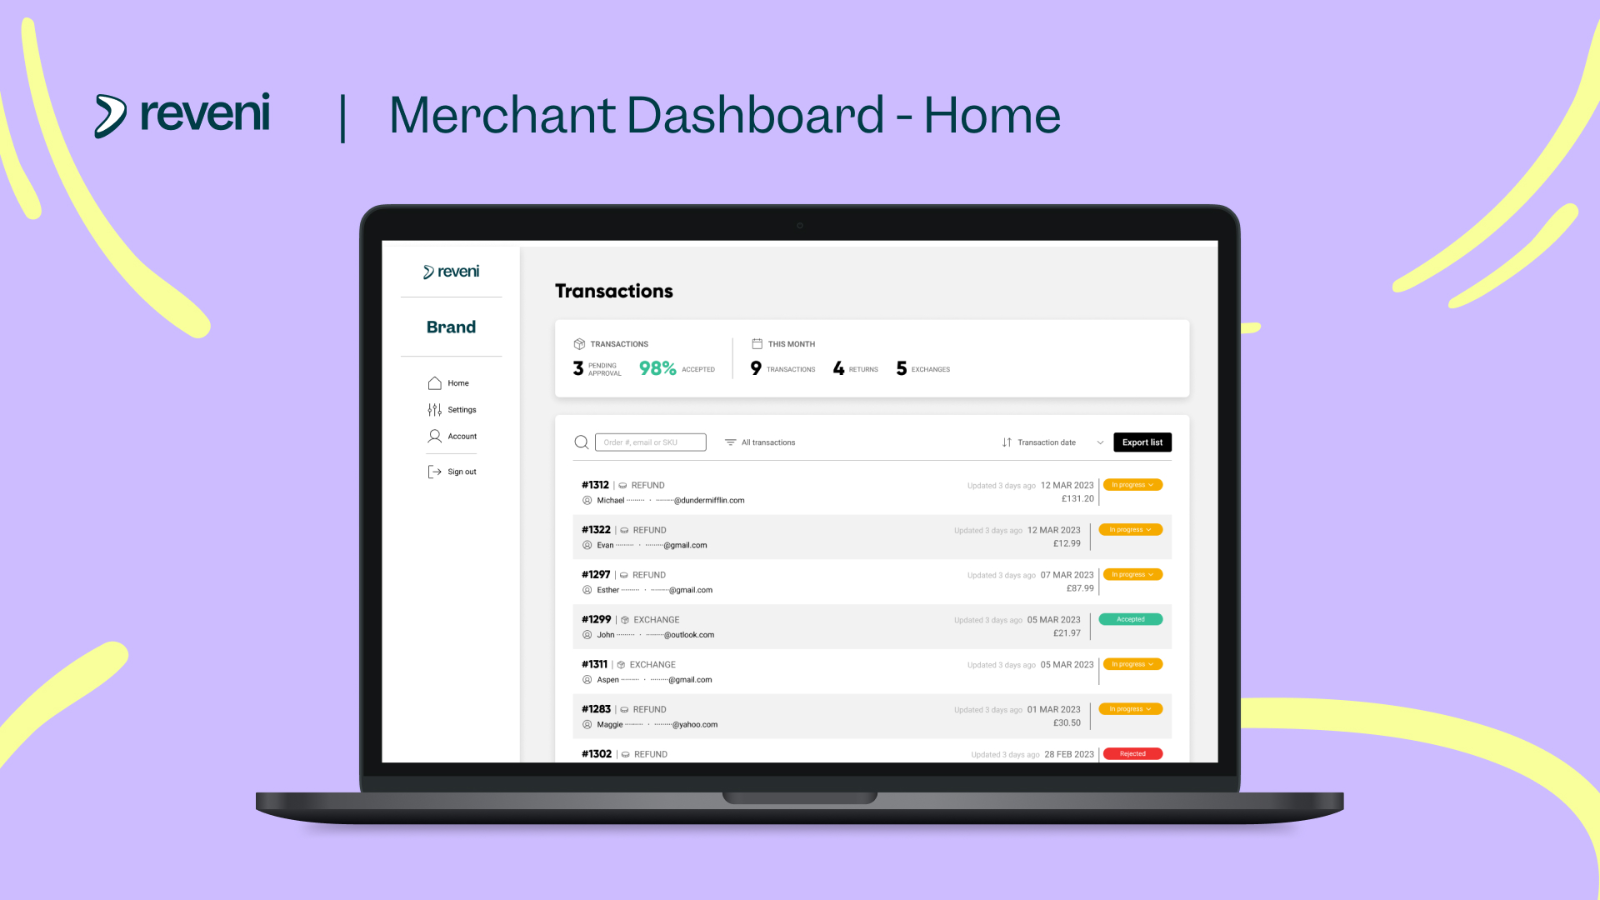 Manage all returns and exchange request from the dashboard